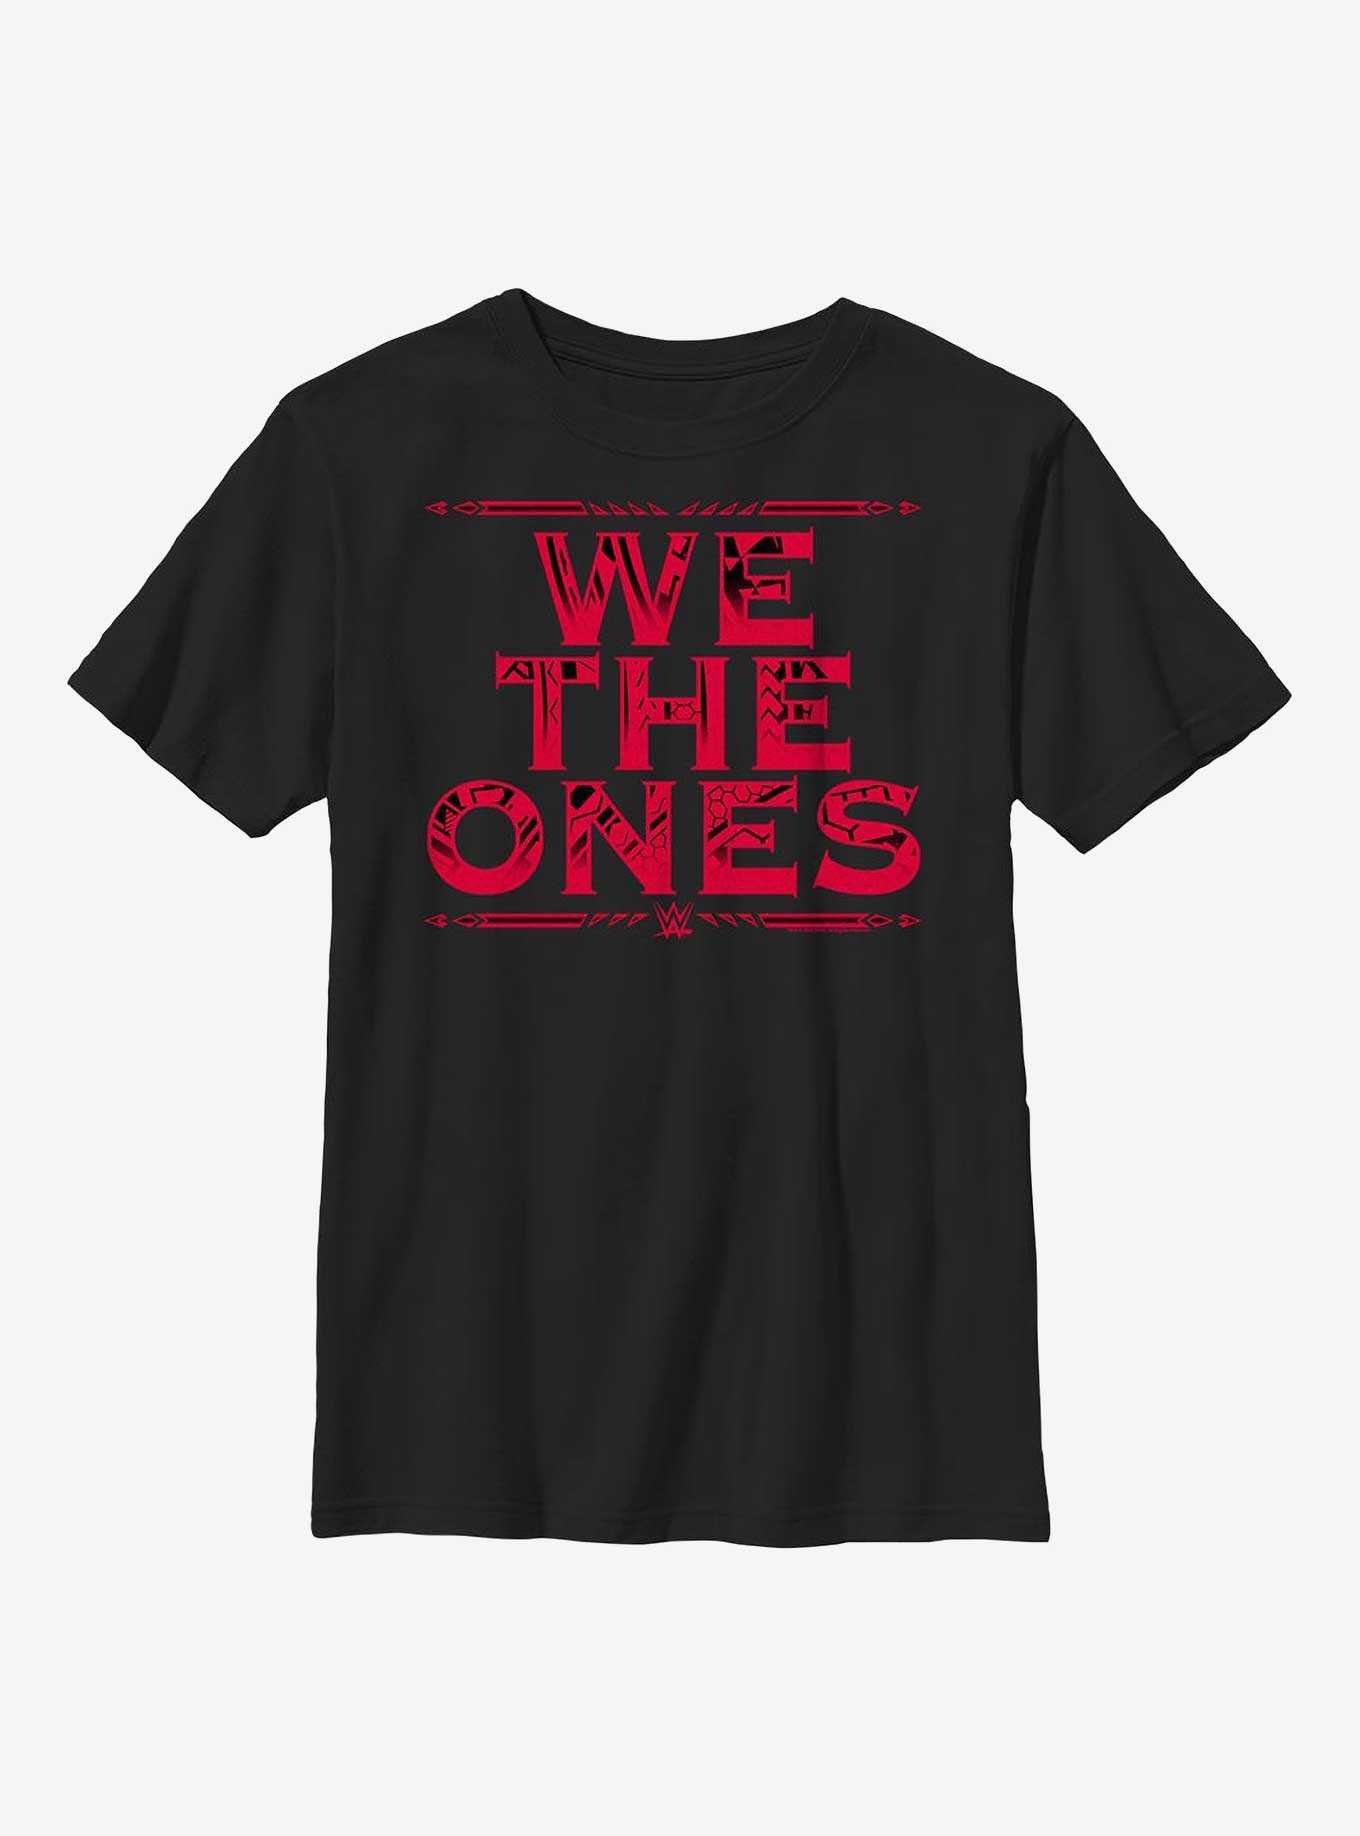 WWE The Bloodline We The Ones Youth T-Shirt, , hi-res